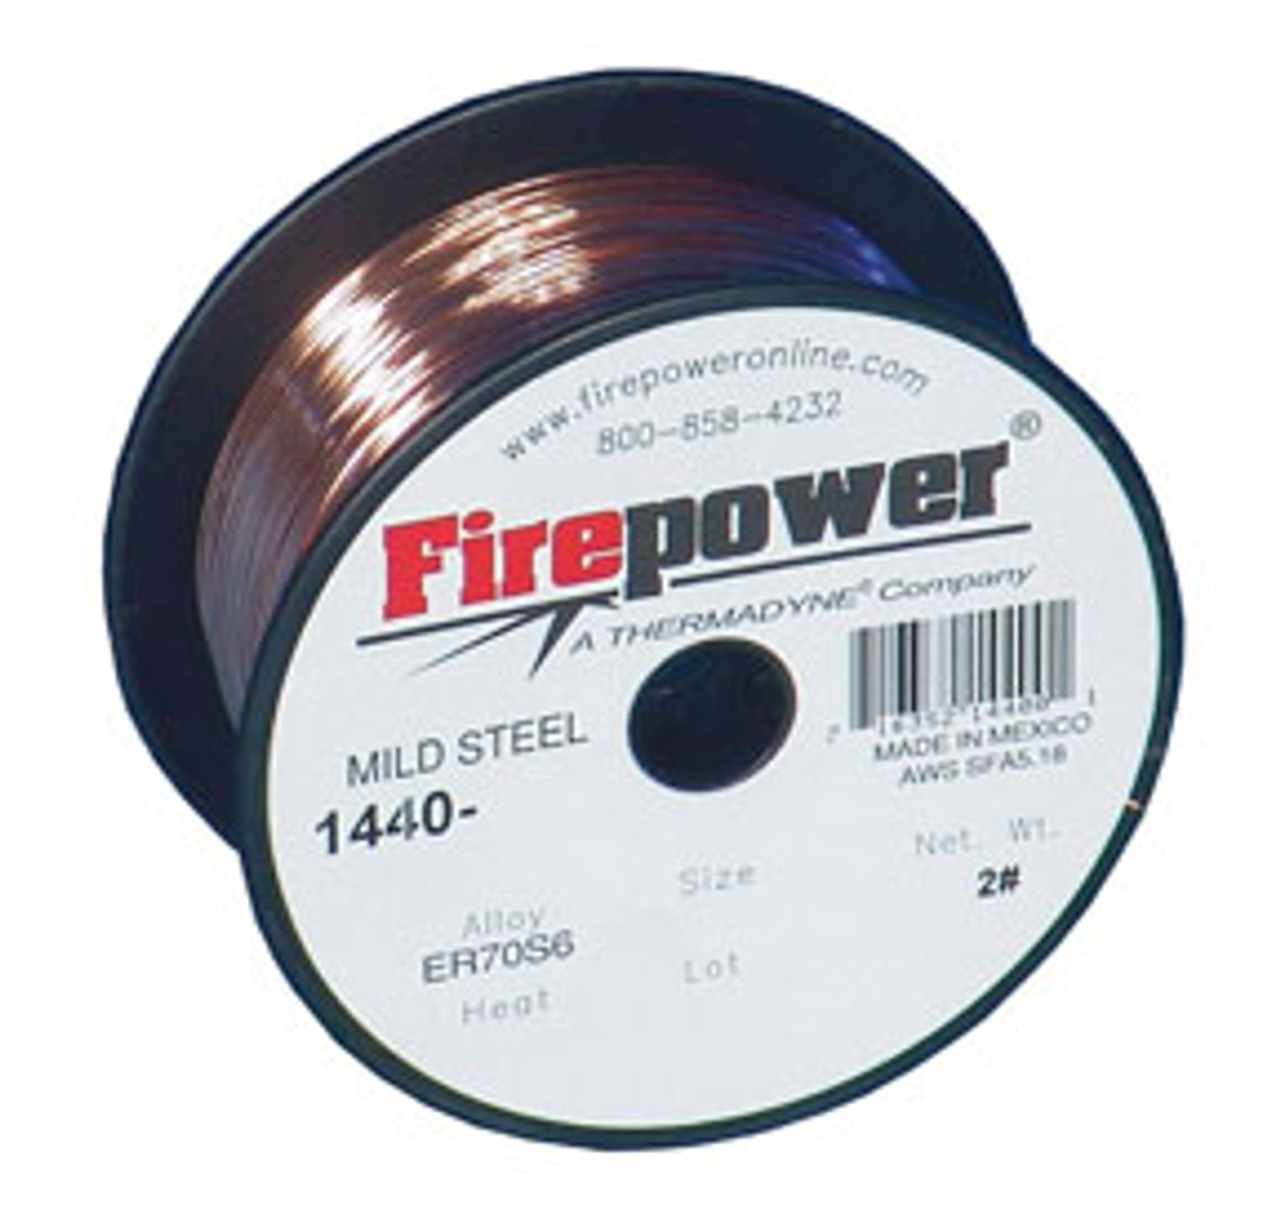 FIREPOWER ER70S-6 MIG Wire Solid, .35", 2lb VCT-1440-0220